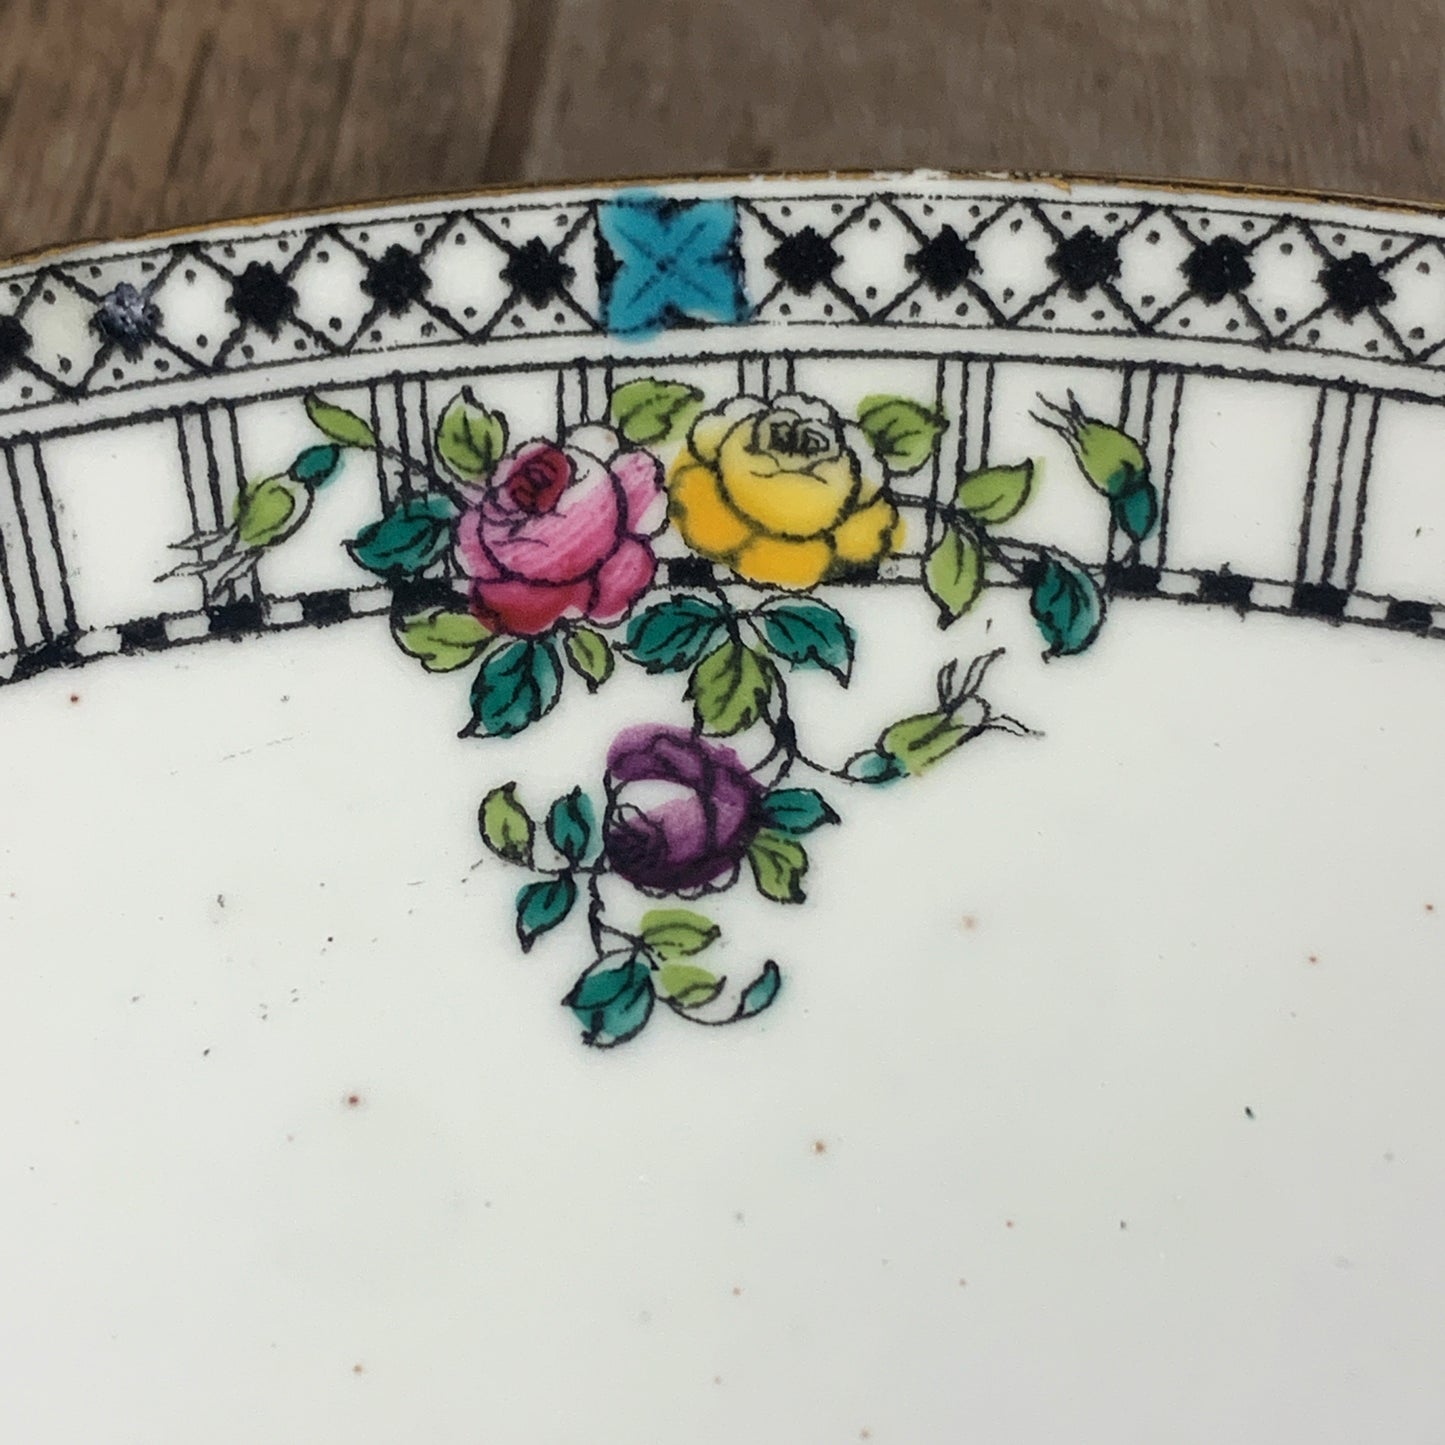 Antique Porcelain Plate with Black Border and Hand Painted Flowers Wildblood, Heath & Sons